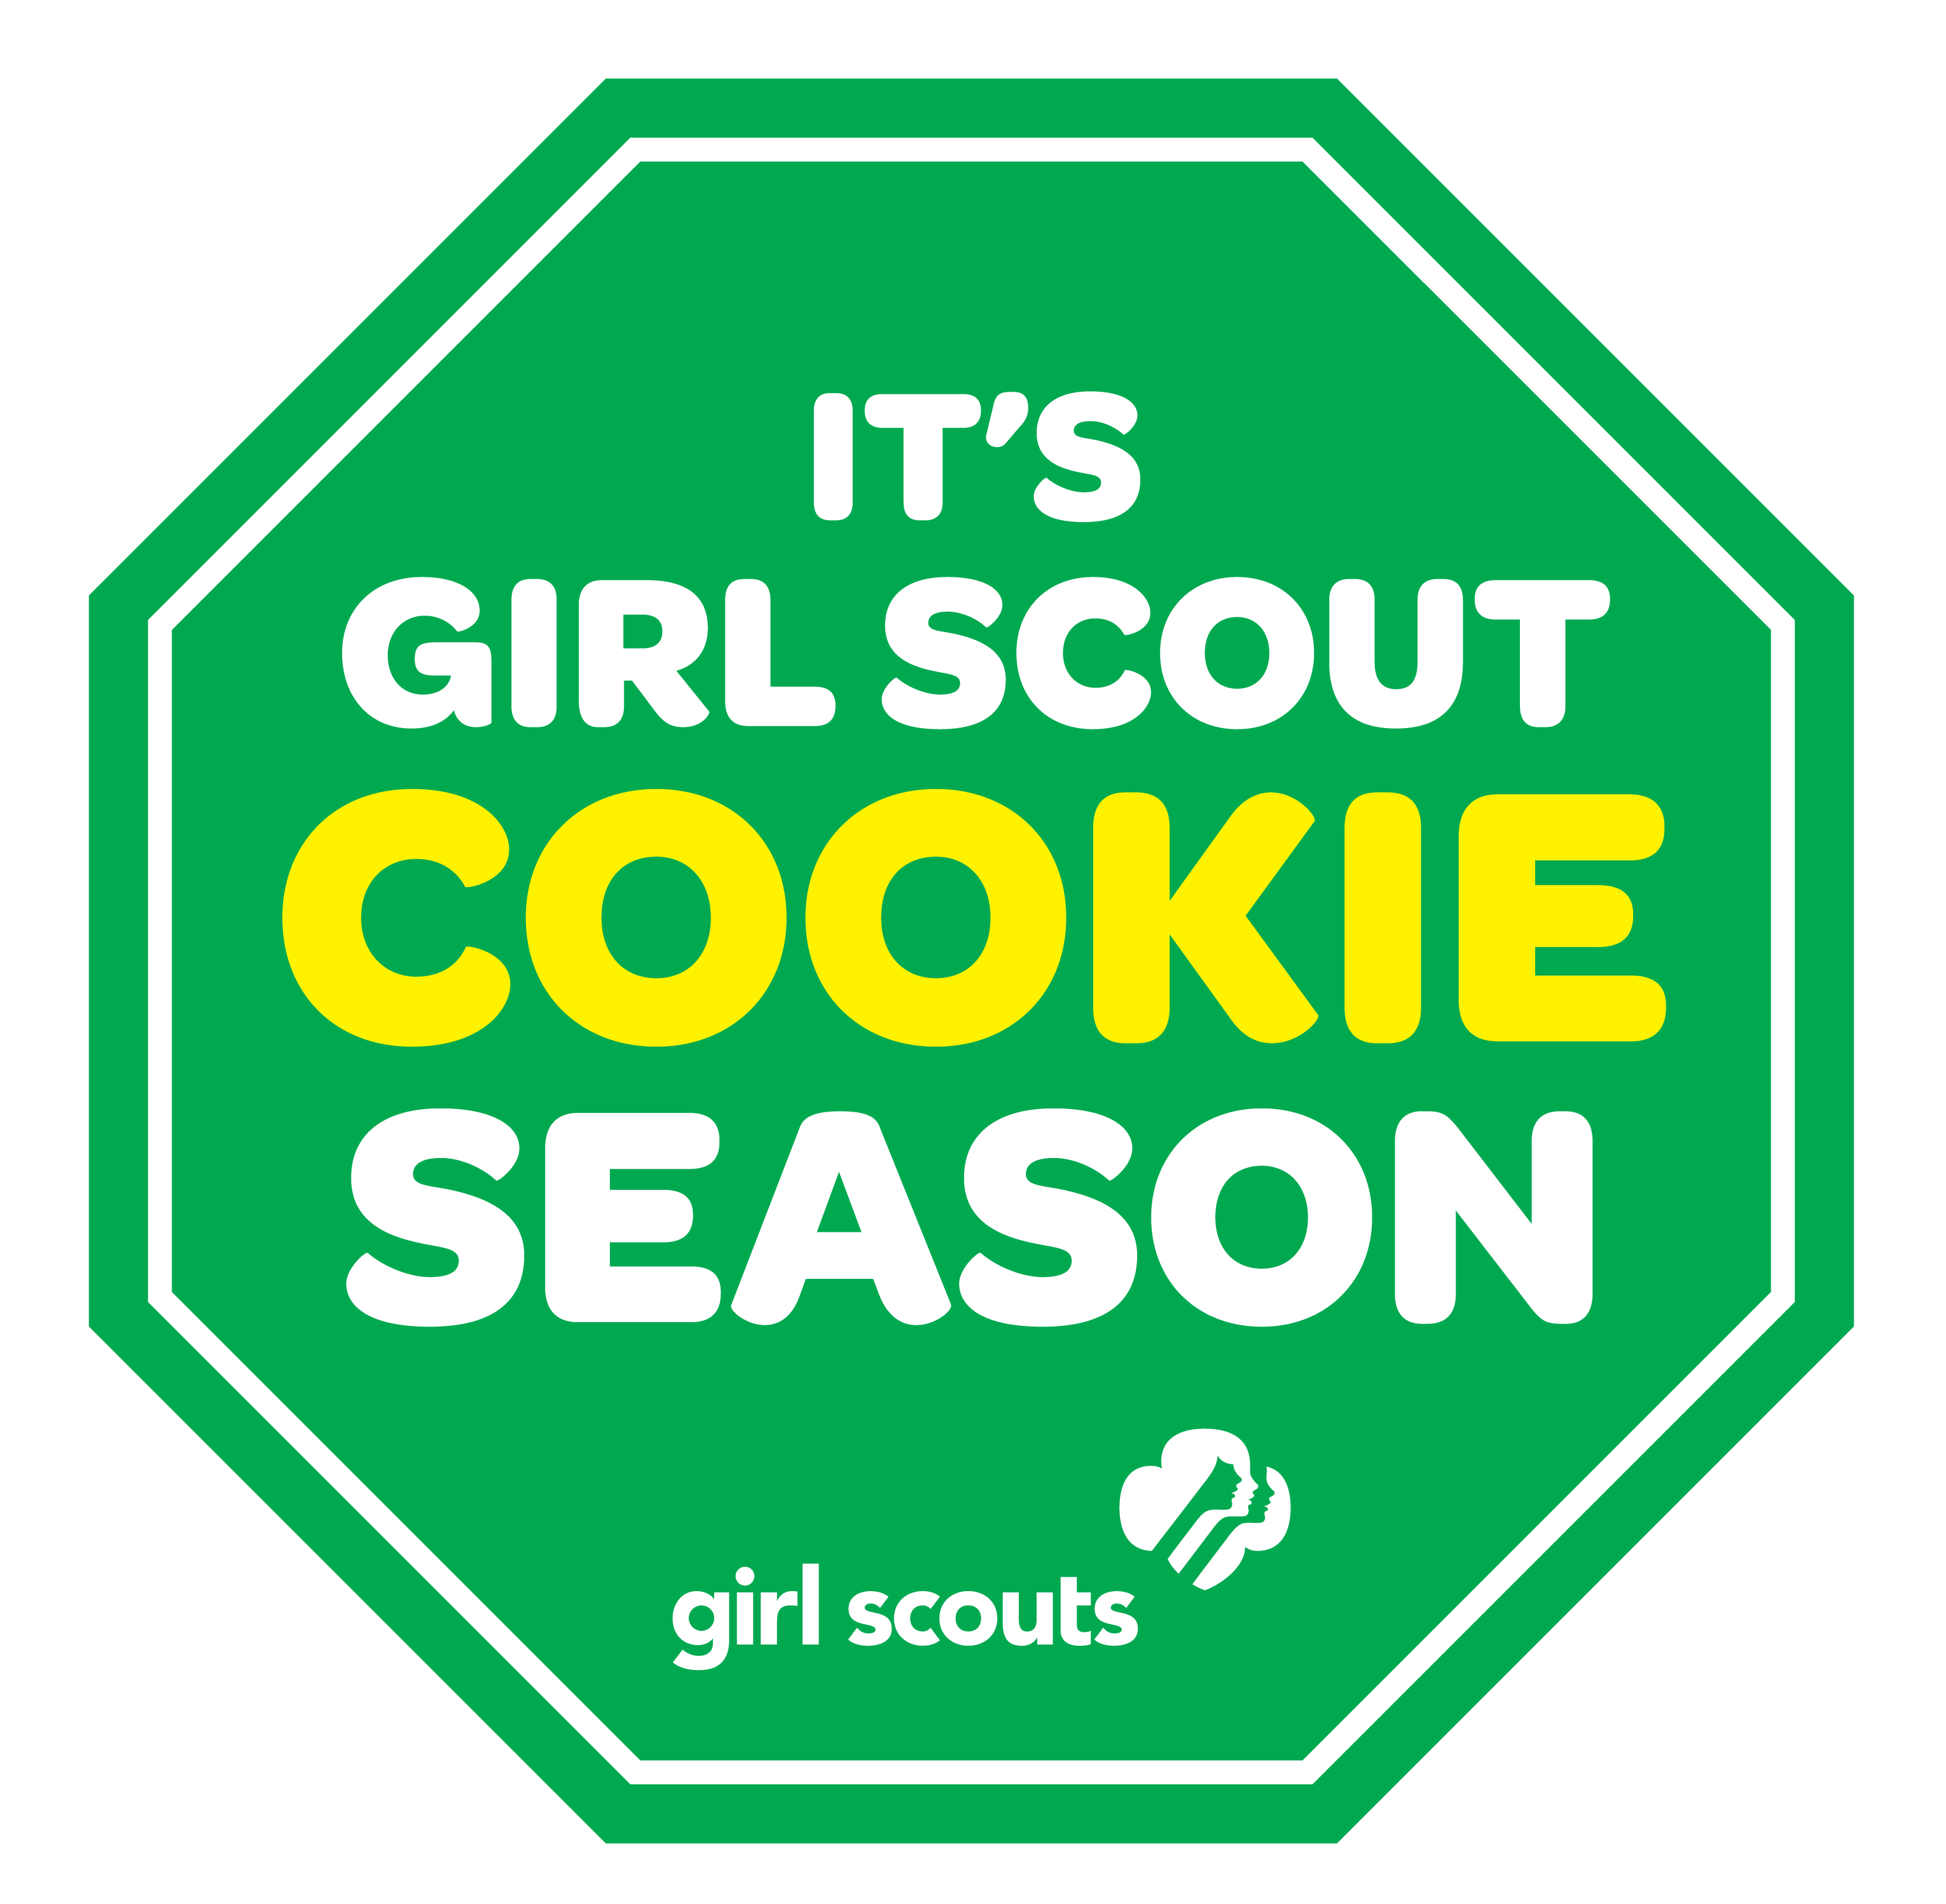 clip art of girl scouts - photo #37